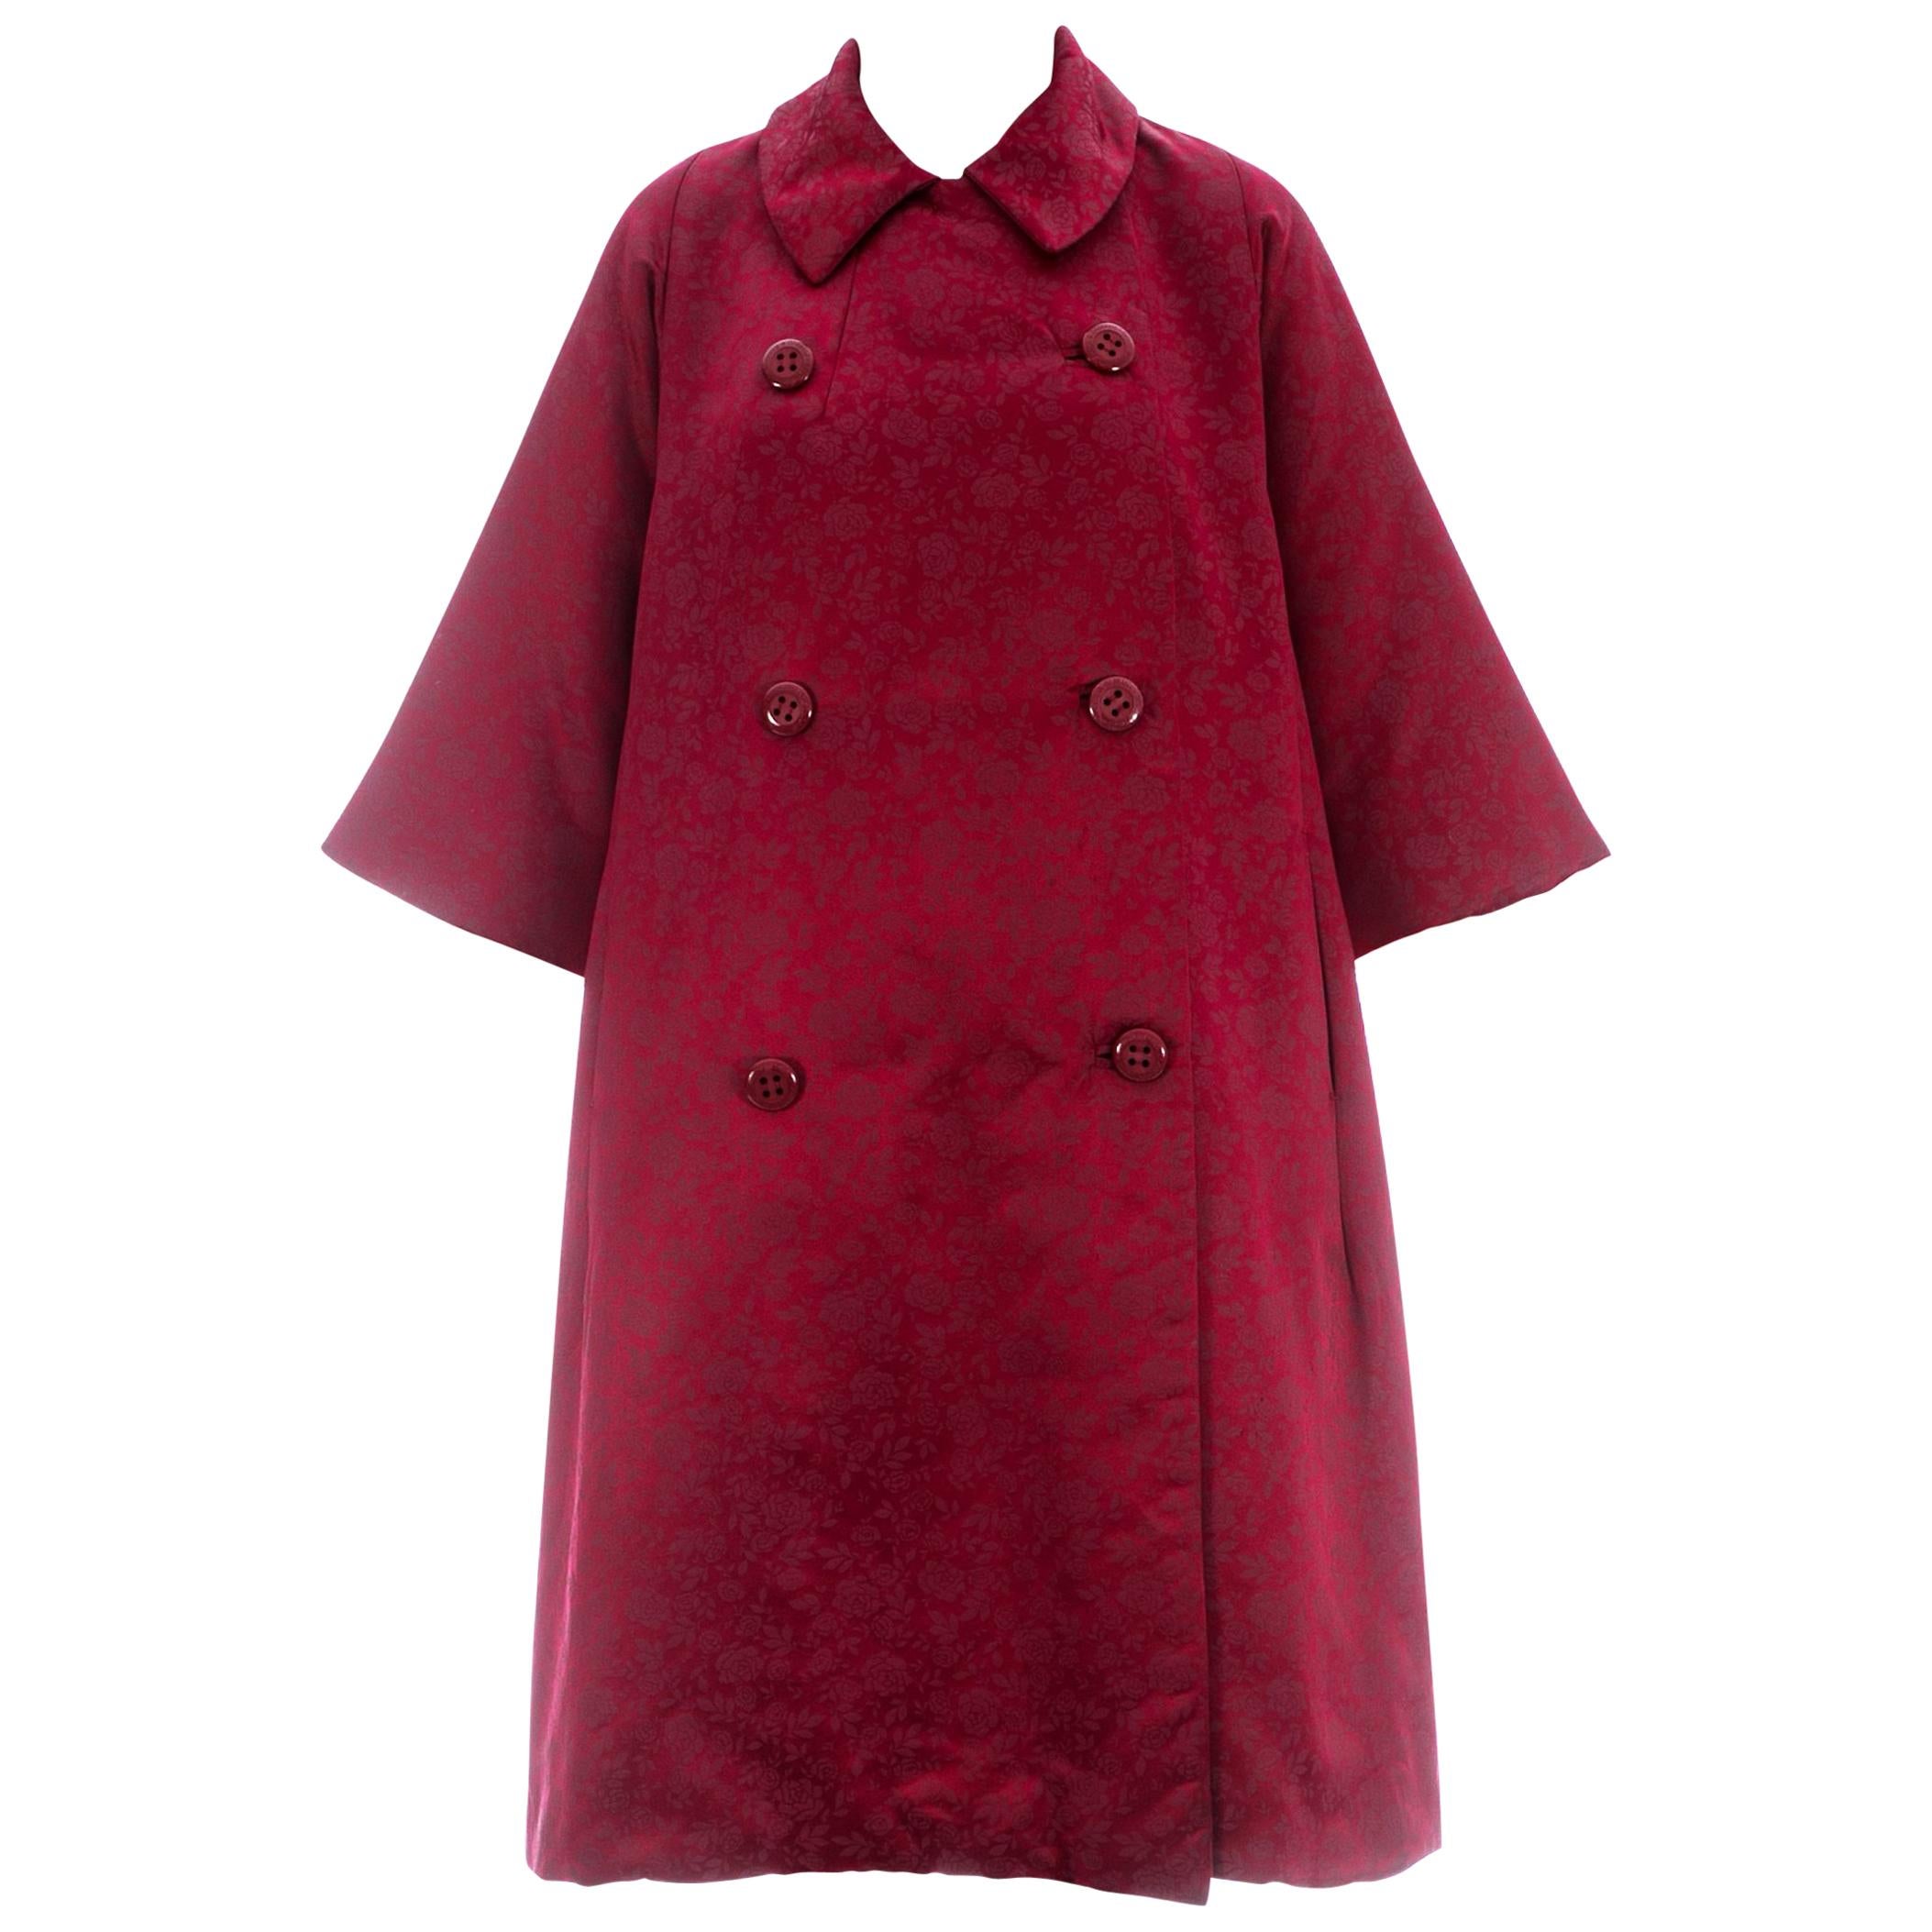 Dolce & Gabbana red silk floral jacquard quilted opera coat, c. 1990s For Sale